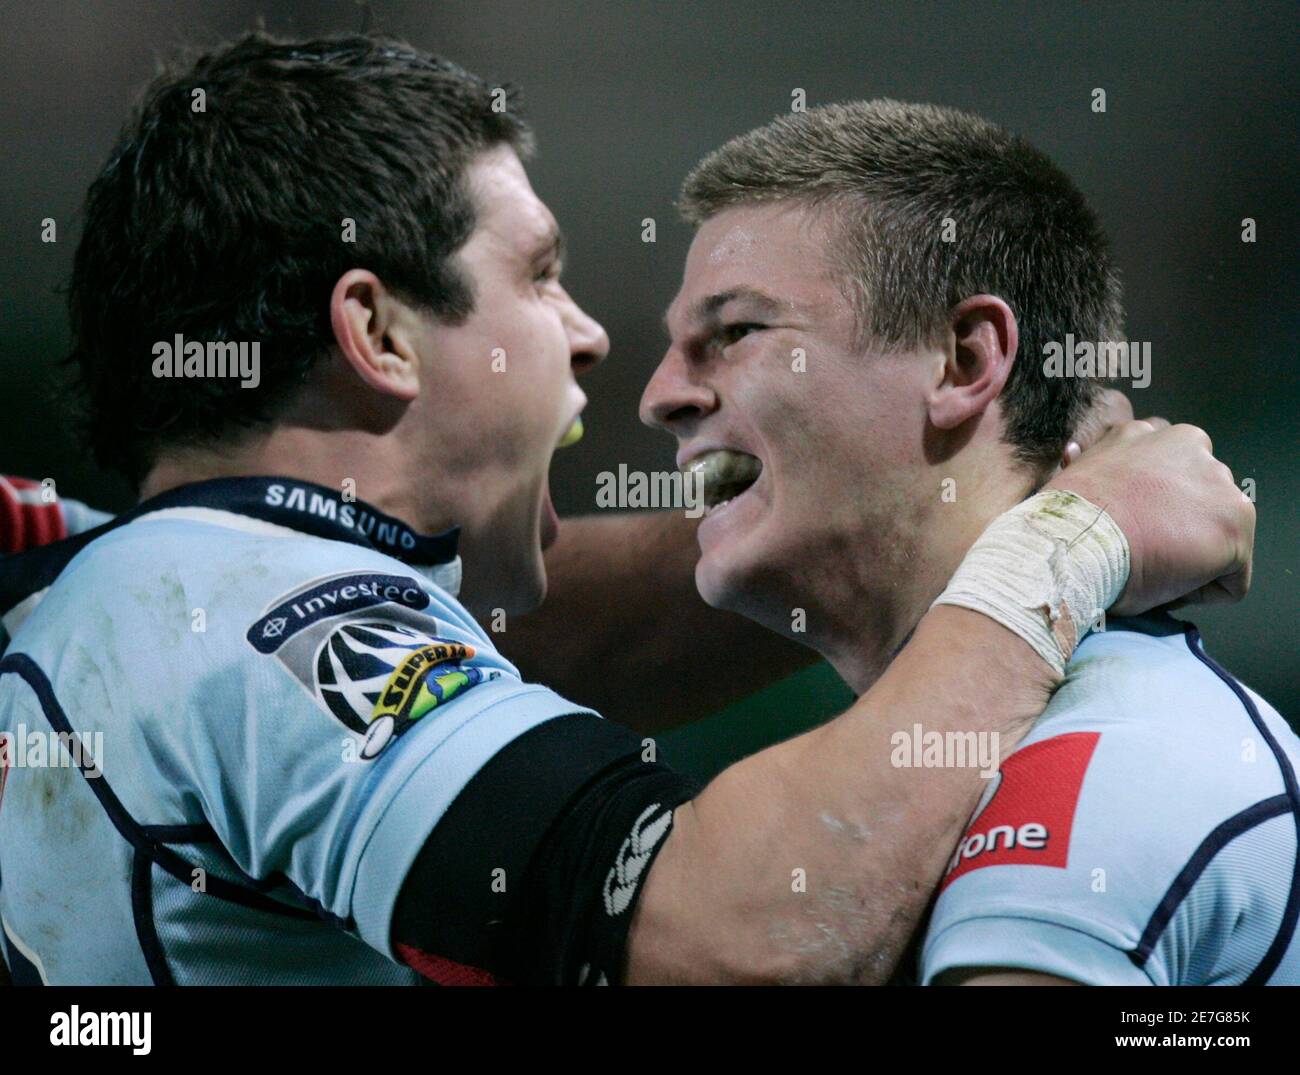 Rob Horne of the Waratahs from Australia (R) is joined by tea mate Tom Carter after scoring against the Sharks from South Africa during their Super 14 semi-final rugby match in Sydney May 24, 2008. REUTERS/Will Burgess    (AUSTRALIA) Stock Photo